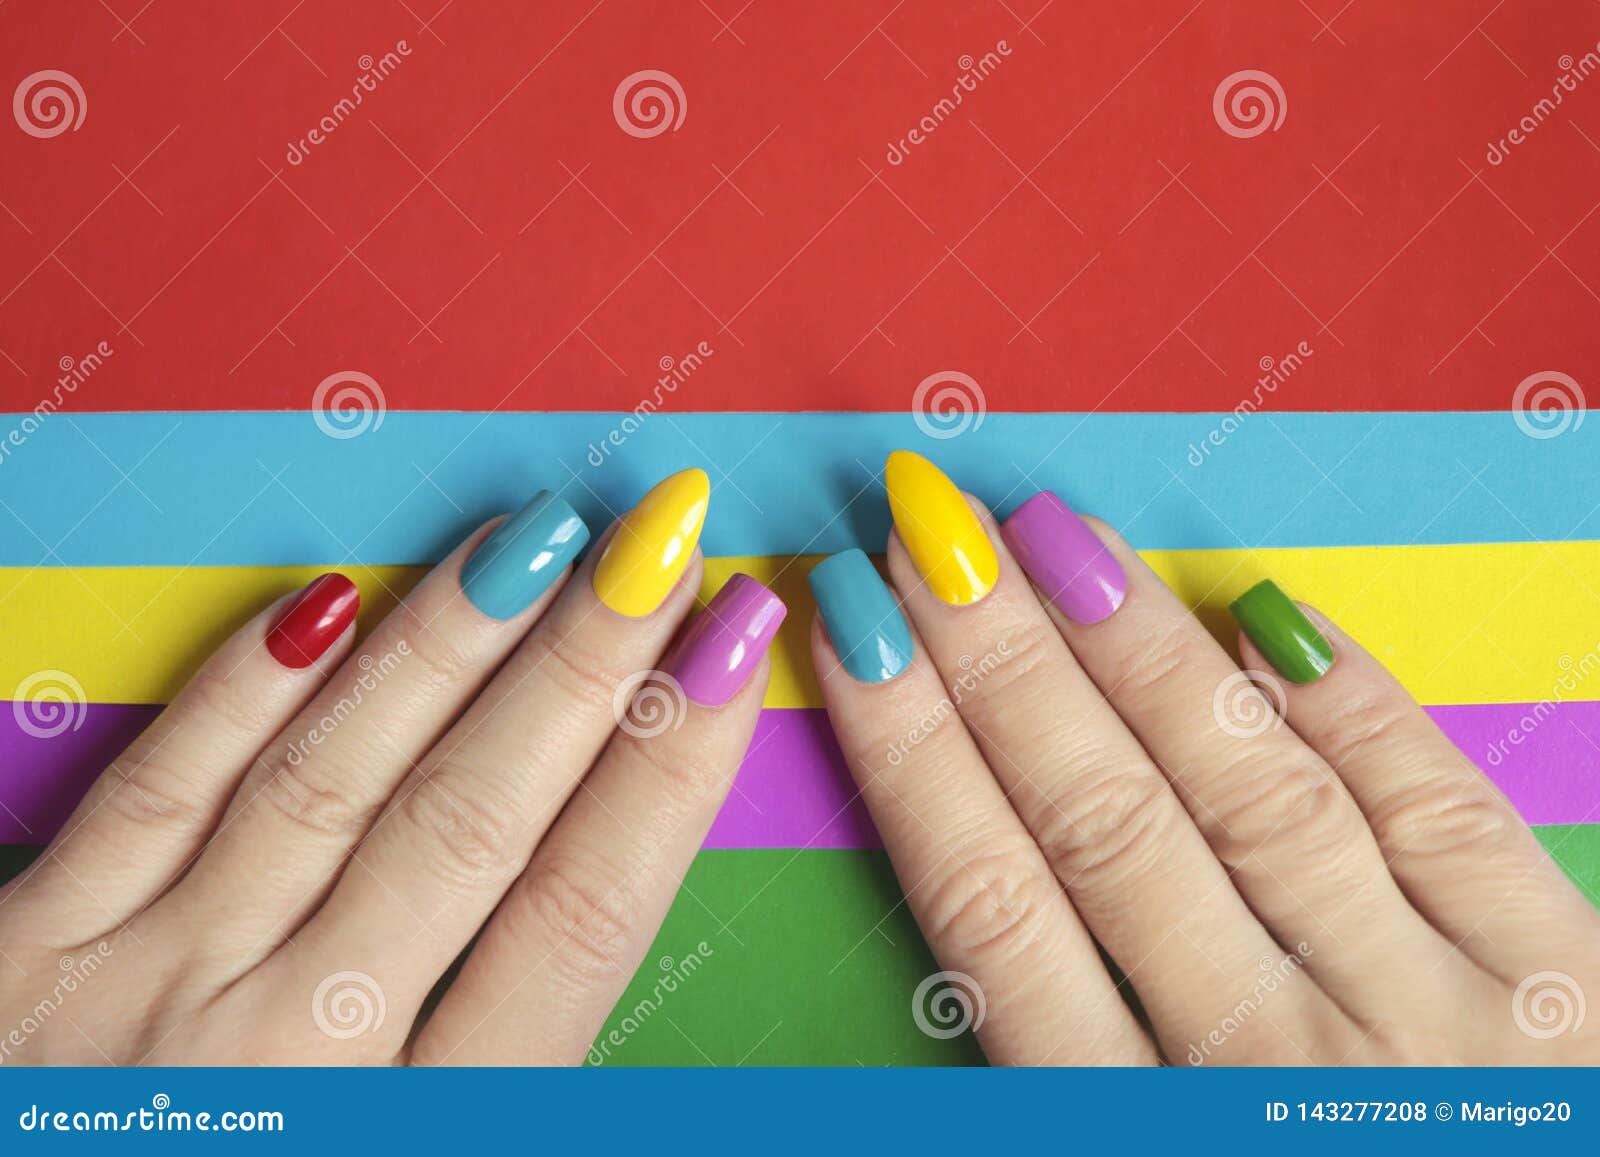 Colorful Bright Manicure with Different Nail Shape,sharp,oval and ...